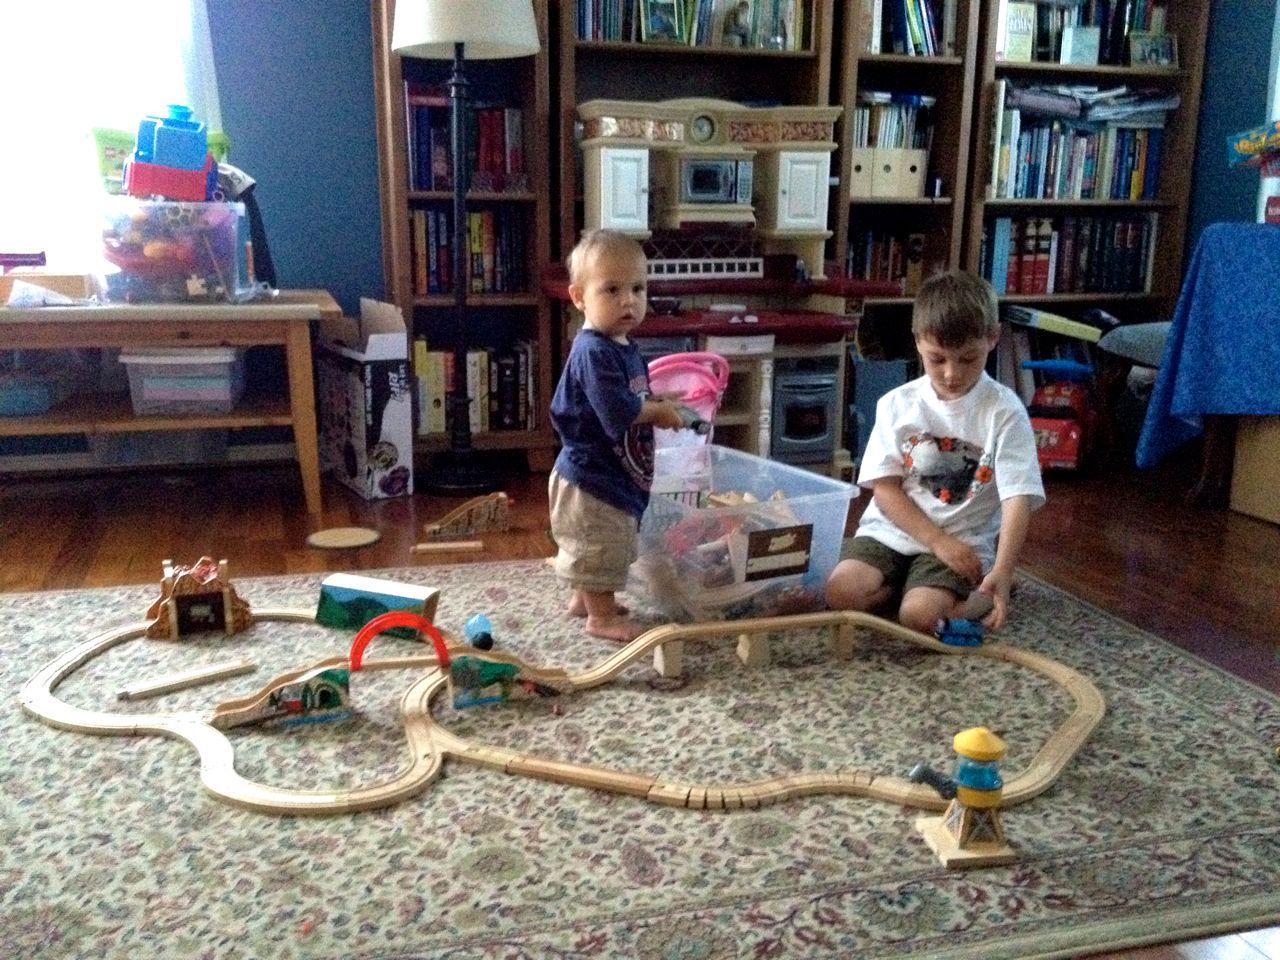  Mr. Bananas and Boogie playing trains  